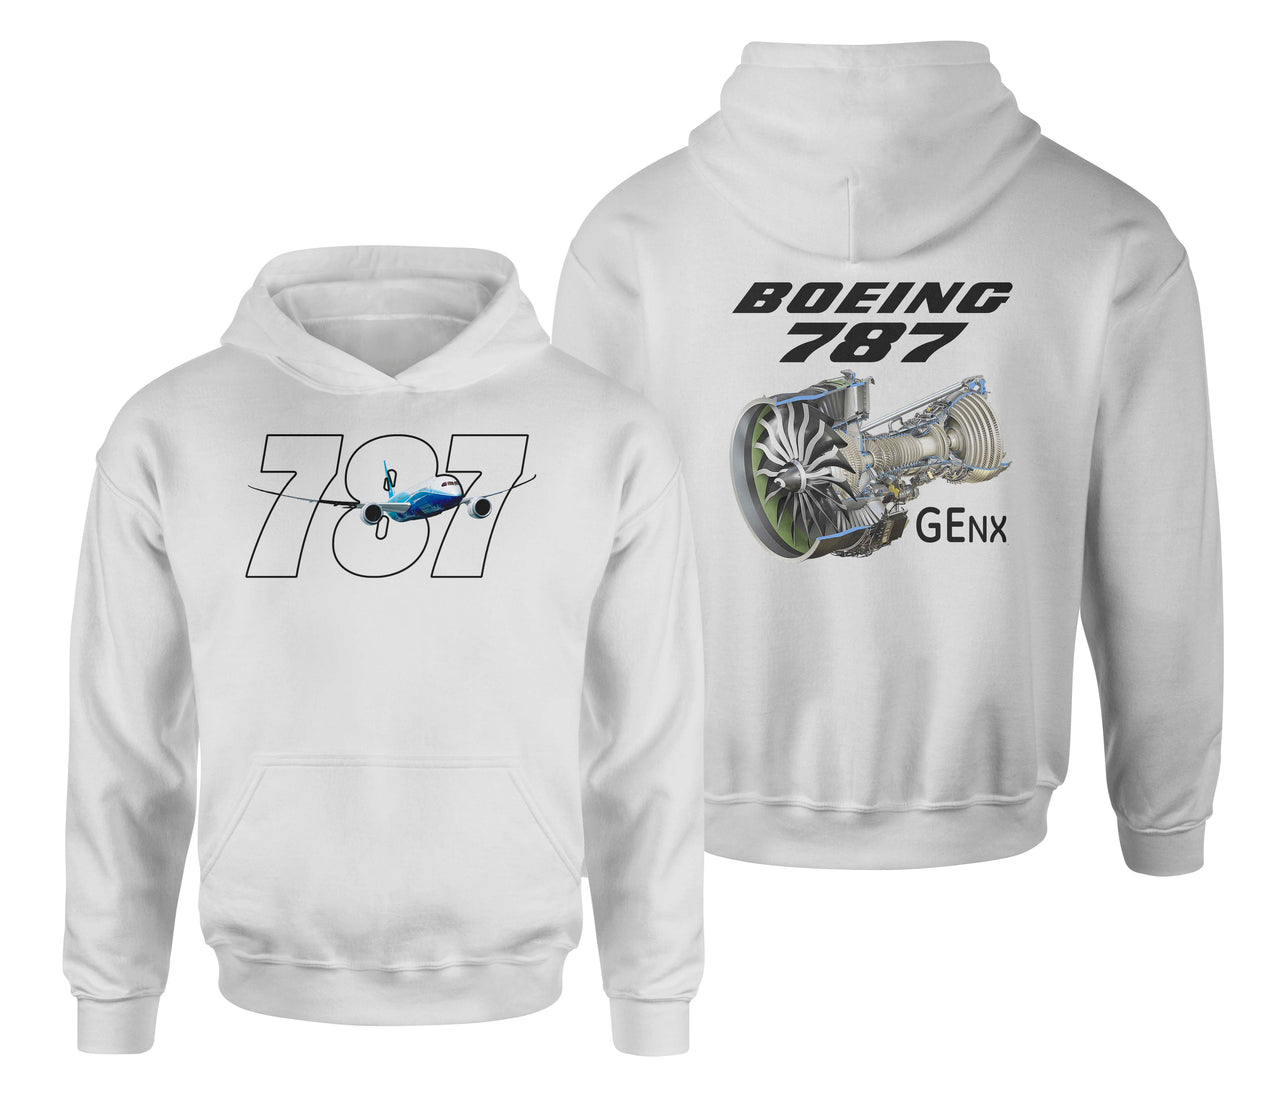 Boeing 787 & GENX Engine Designed Double Side Hoodies